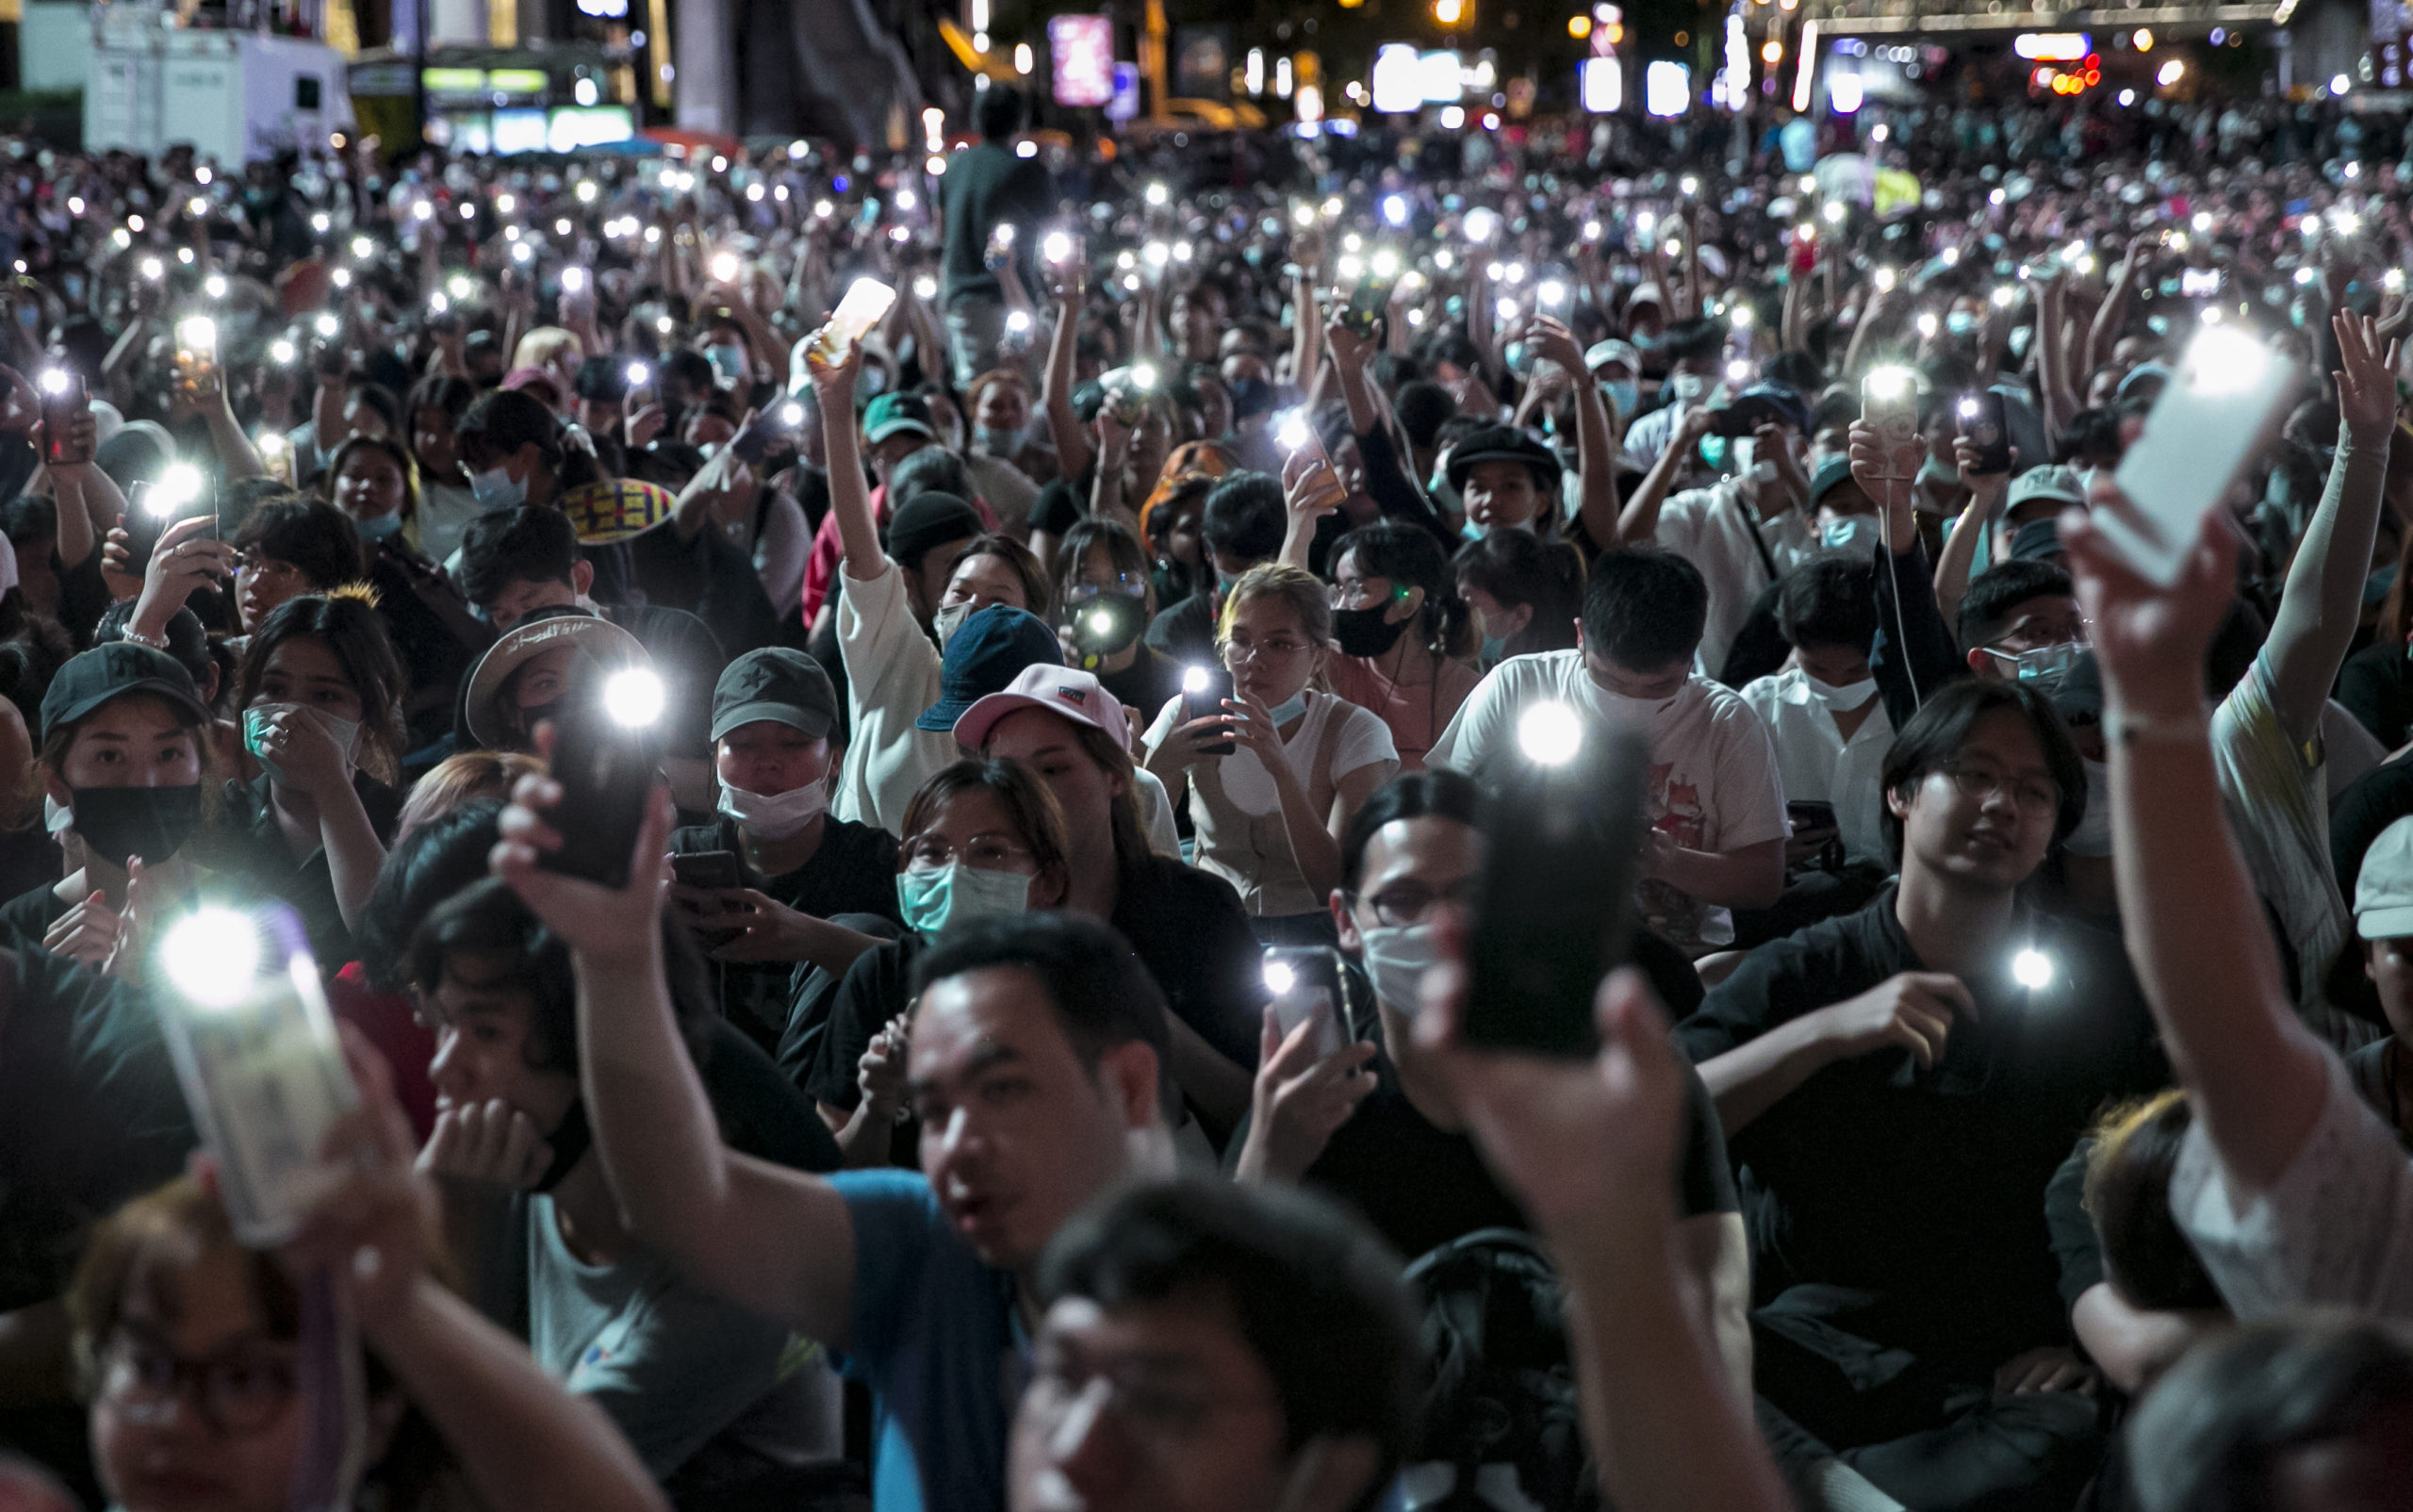 BANGKOK, THAILAND - OCTOBER 15: Protesters attend a rally October 15, 2020 in Bangkok, Thailand. Thousands of anti-government protesters and students held a demonstration at the Ratchaprasong Intersection in central Bangkok, marking the latest in a string of anti-government protests that began in late July with students and protesters calling for governmental reform. (Photo by Stringer/Getty Images)